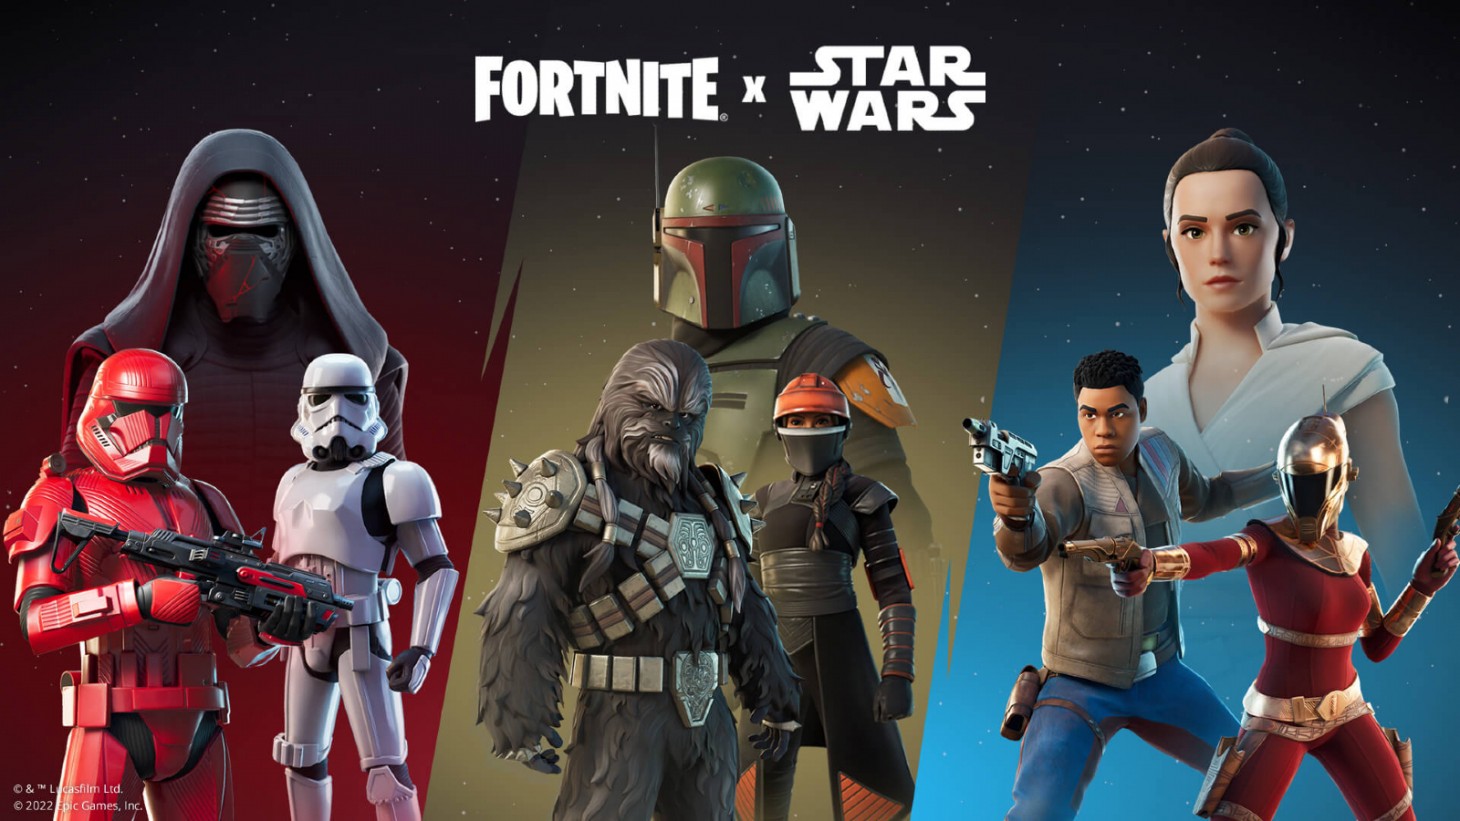 Here’s How Fortnite Is Celebrating Star Wars For The Next Two Weeks